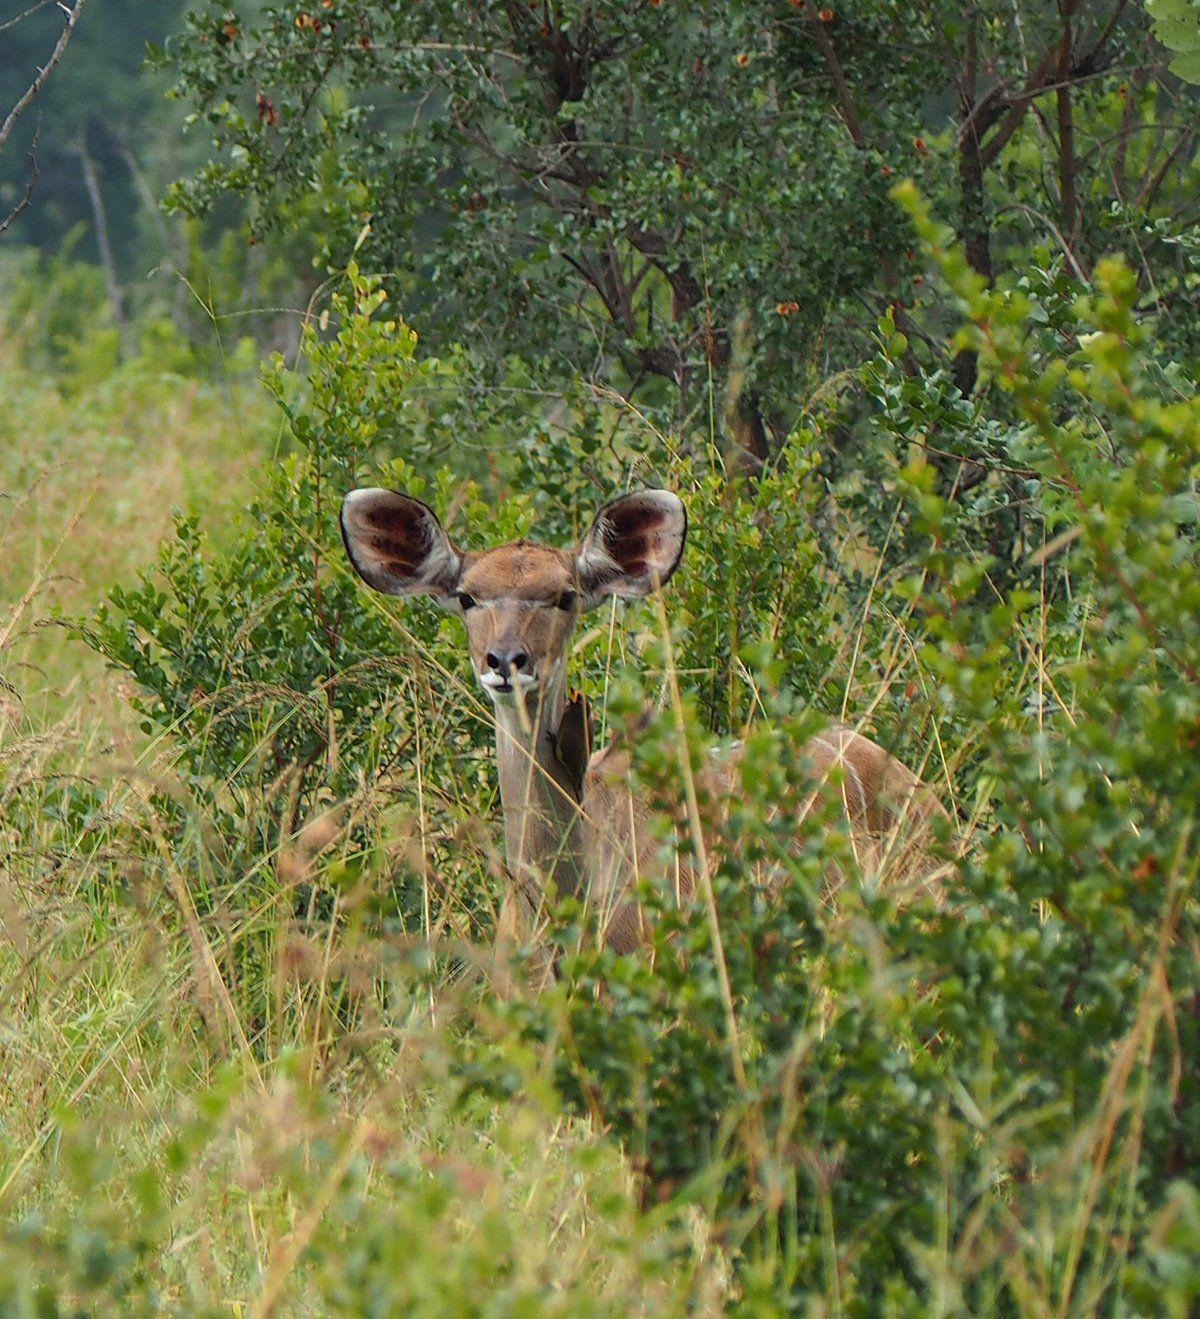 A Kudu peeking out from behind grasses in Kruger National Park